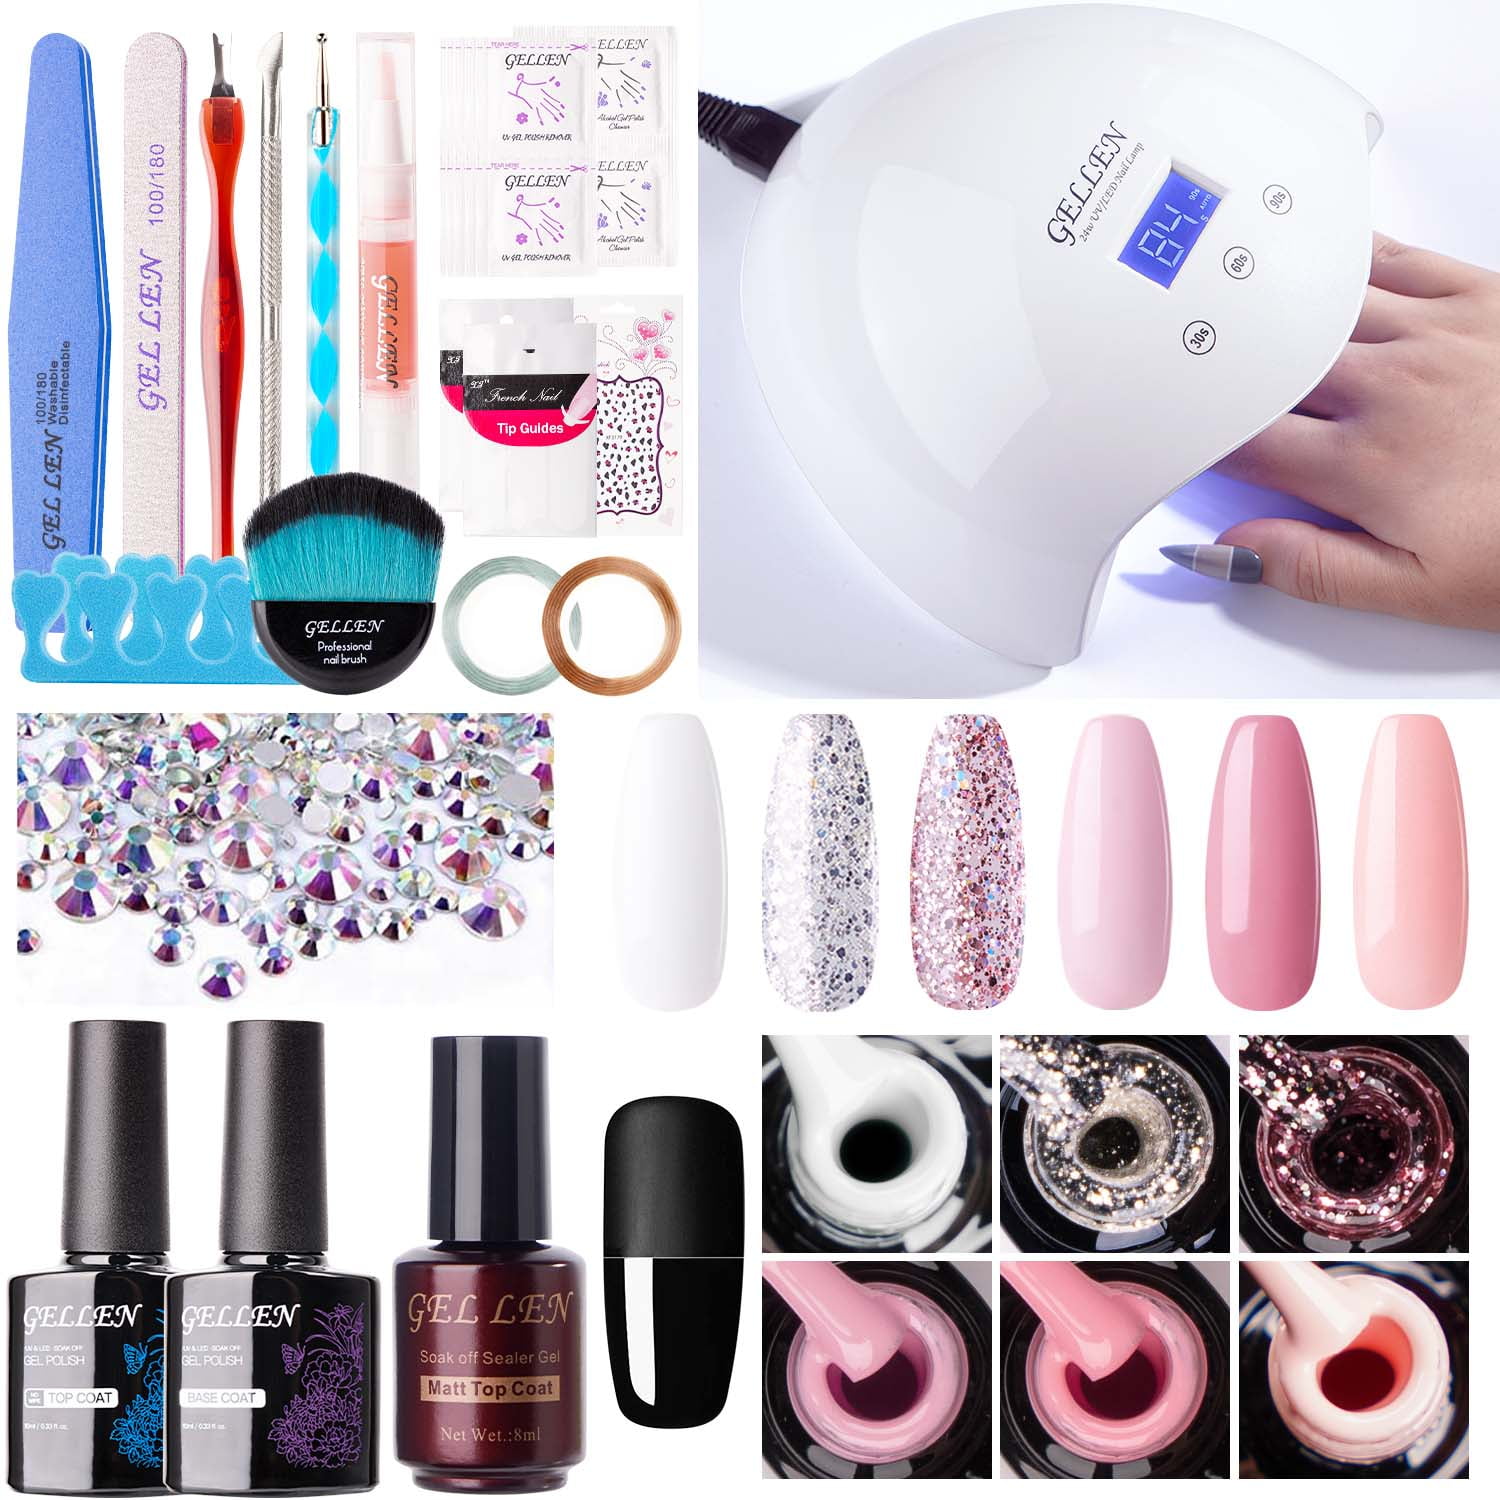 Mere Scully Forfølge Gellen Gel Nail Polish Starter Kit with LED/UV Nail Lamp - Pinks and  Glitters 6 Colors - Walmart.com